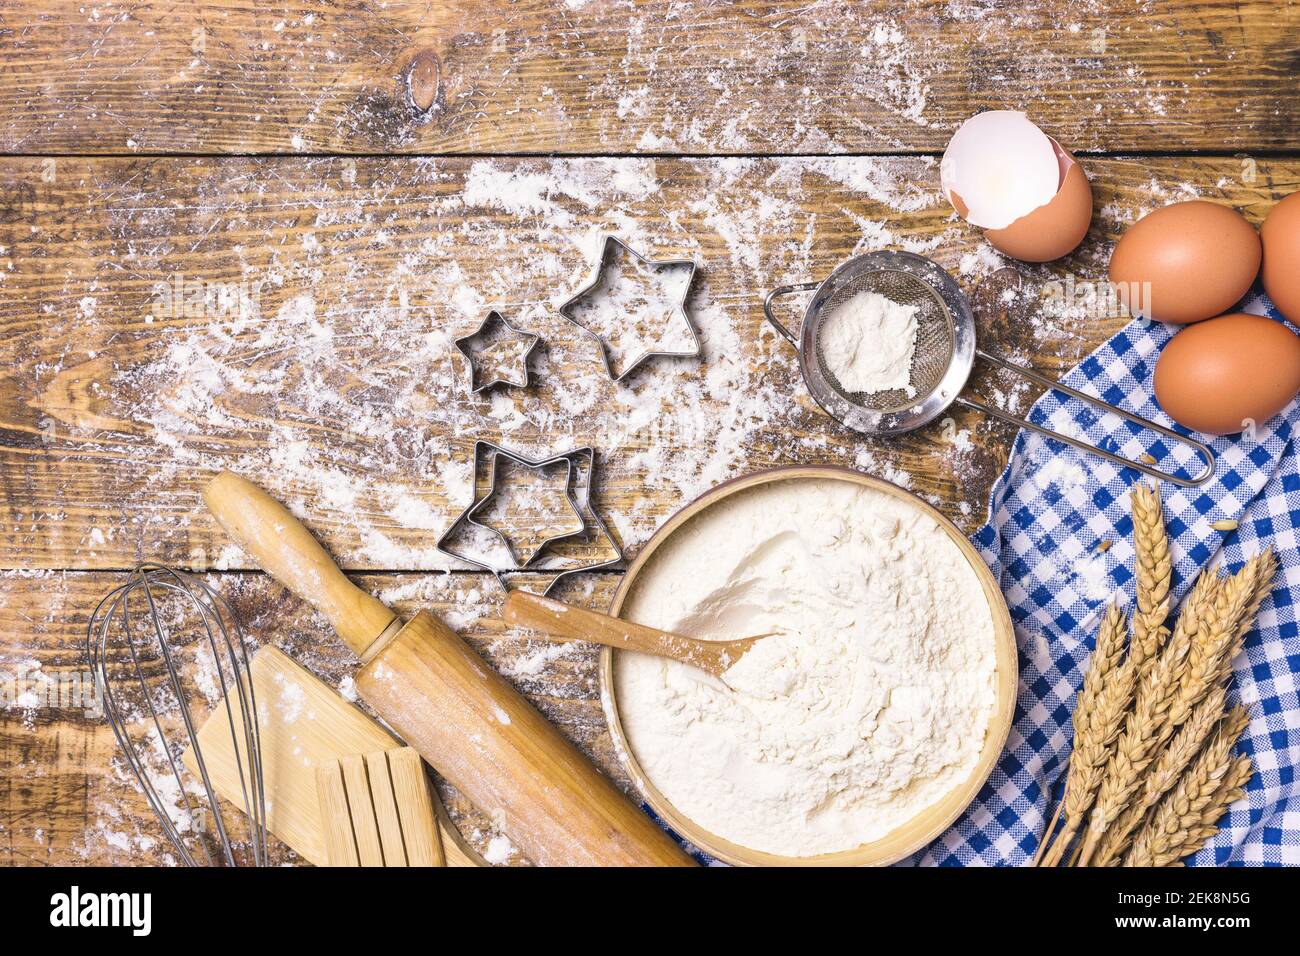 https://c8.alamy.com/comp/2EK8N5G/frame-of-baking-and-cooking-pastry-or-cake-with-ingredients-and-utensils-eggs-flour-and-wheat-on-rustic-wooden-background-with-copy-space-for-text-2EK8N5G.jpg